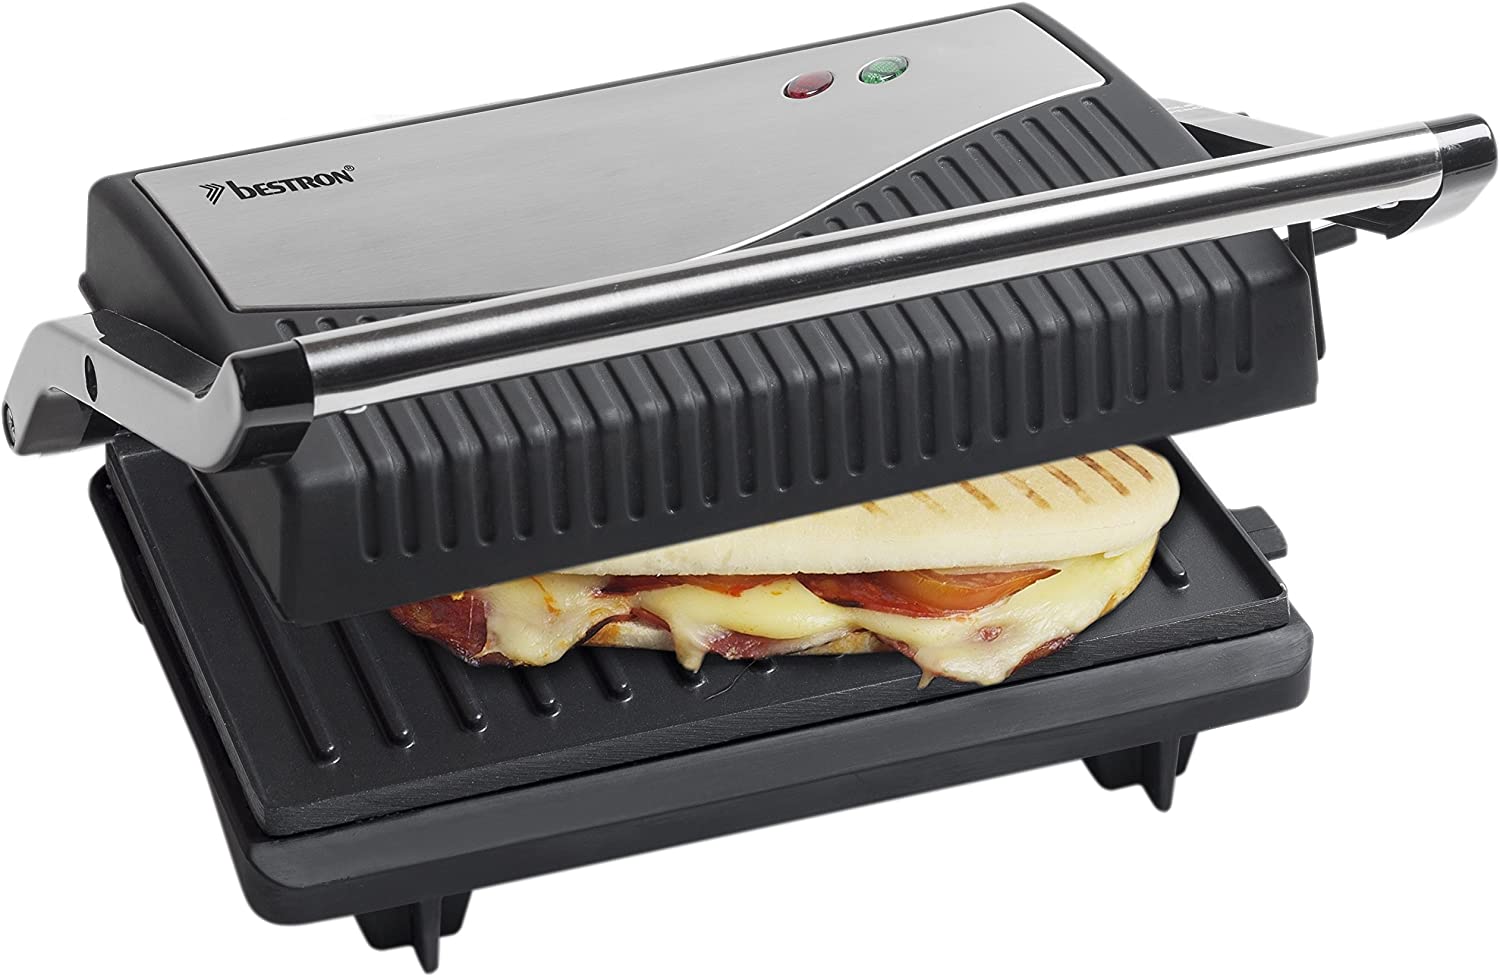 Bestron Contact Grill with Collection Tray, Sandwich Maker with Cool Touch Handle, 180° Hinged and Non-Stick Coating, 750 Watt, APG150, Colour: Silver/Black